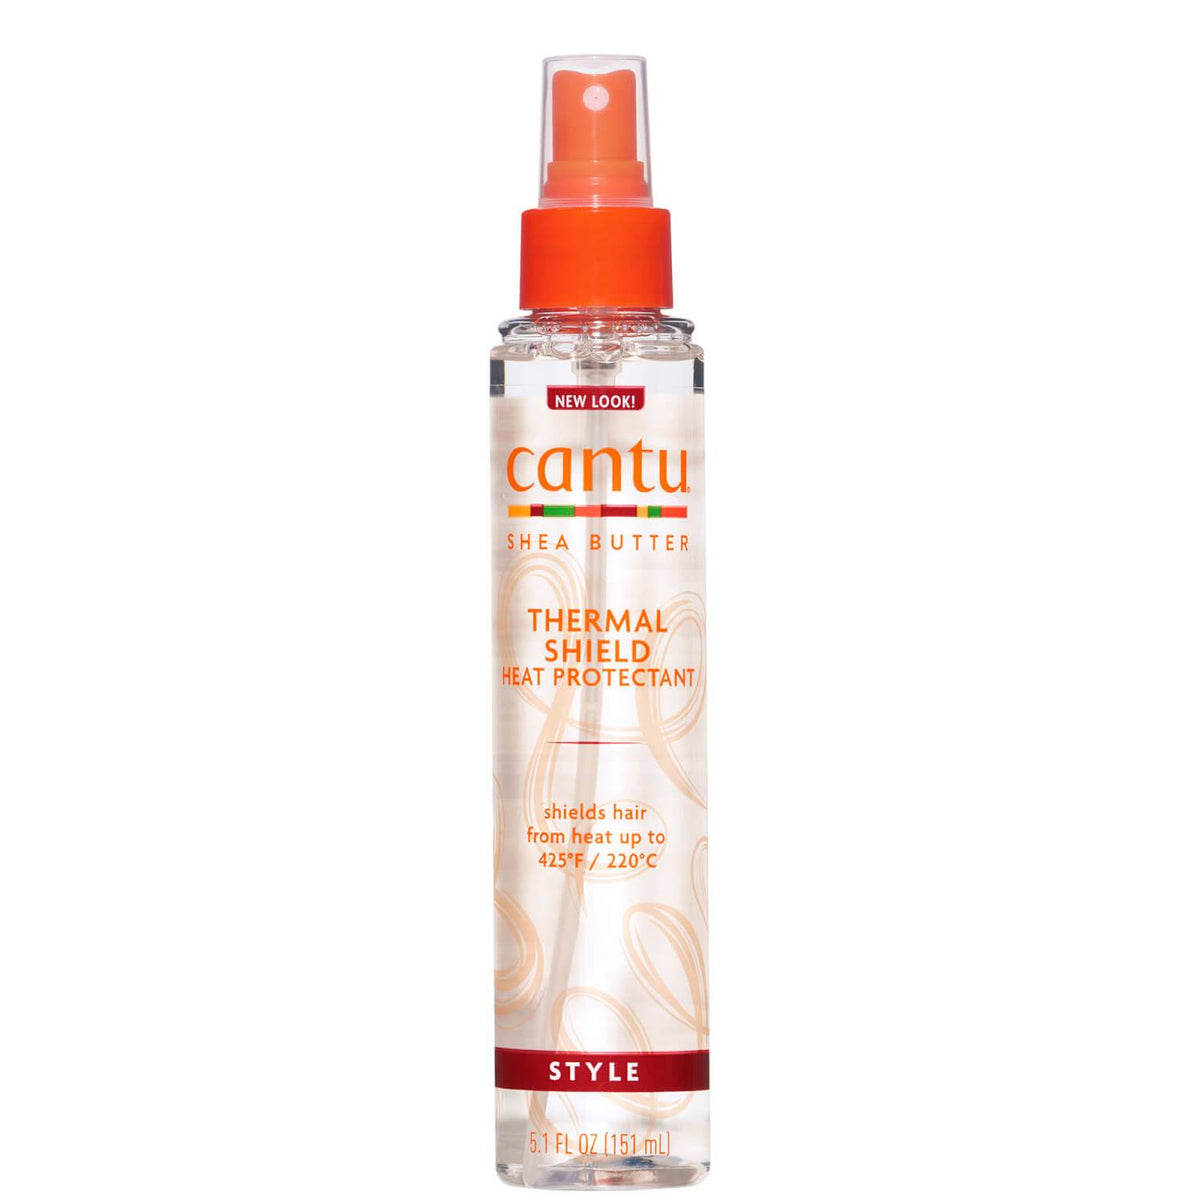 Cantu Shea Butter Thermal Shield Heat Protectant, 151ml